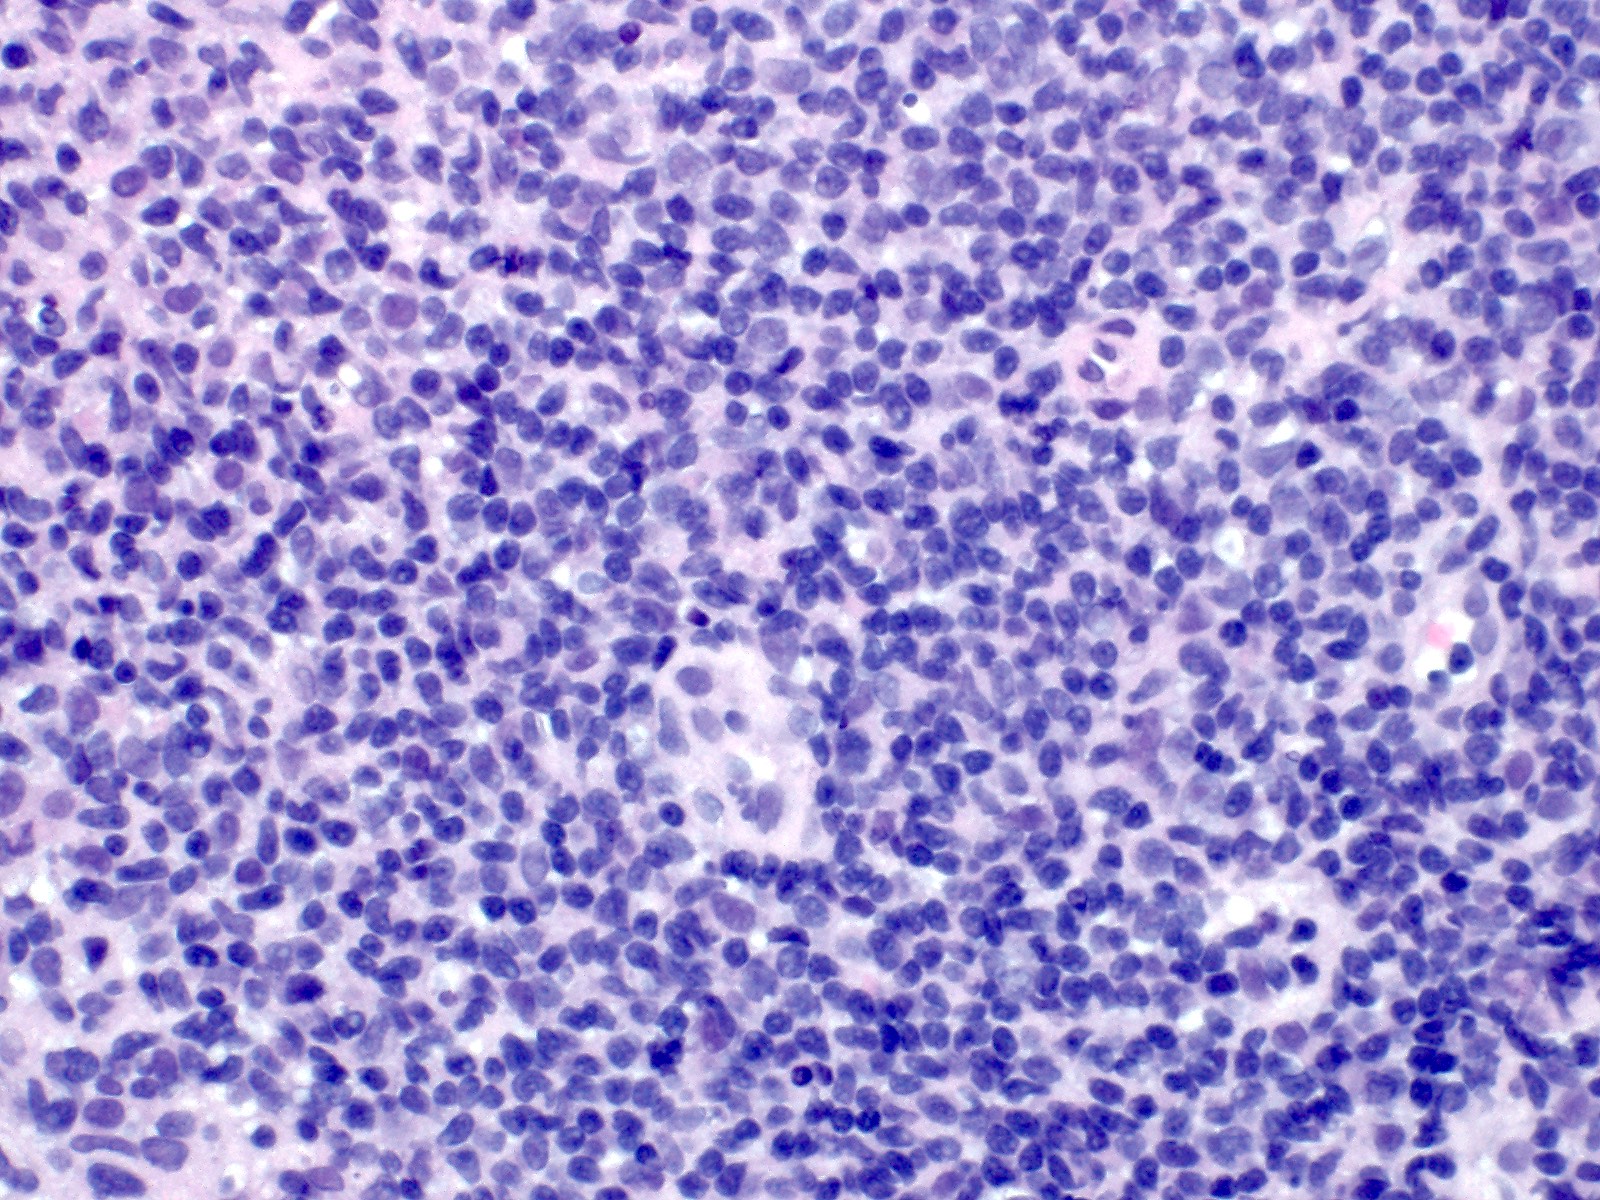 Atypical infiltrate of indolent T-LPD